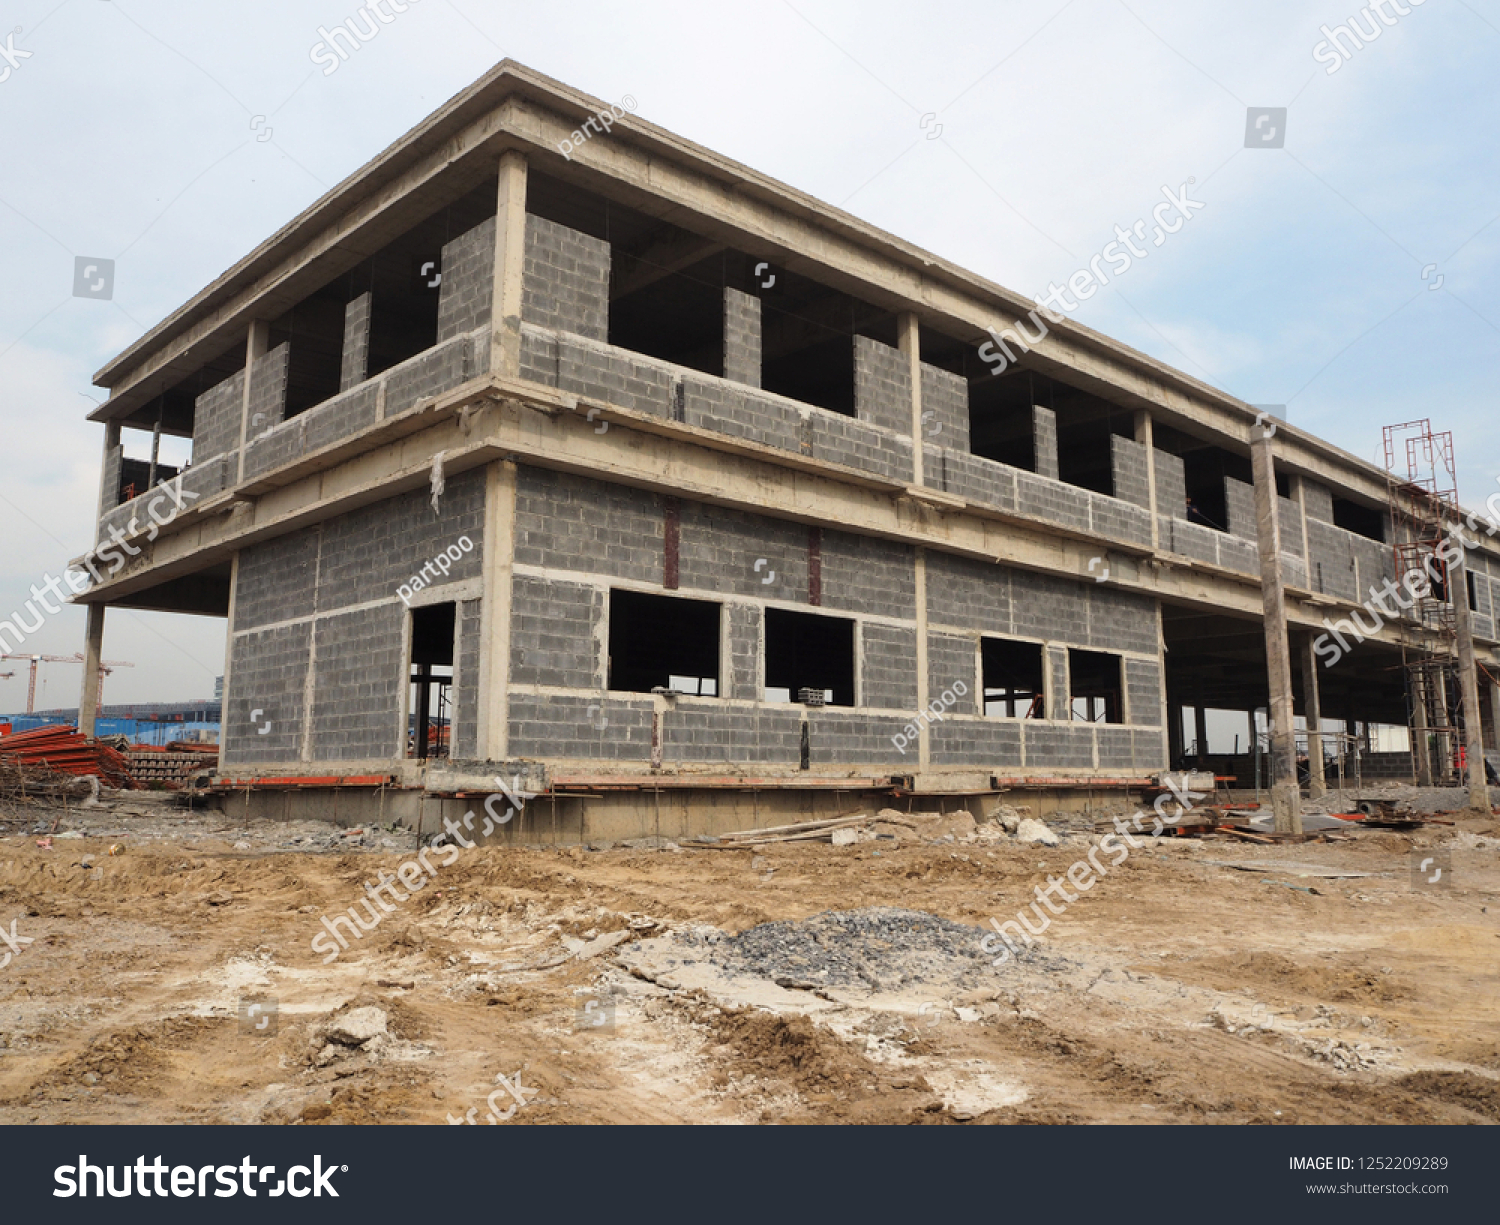 construction site of building edifice house structure structuring formatting #1252209289